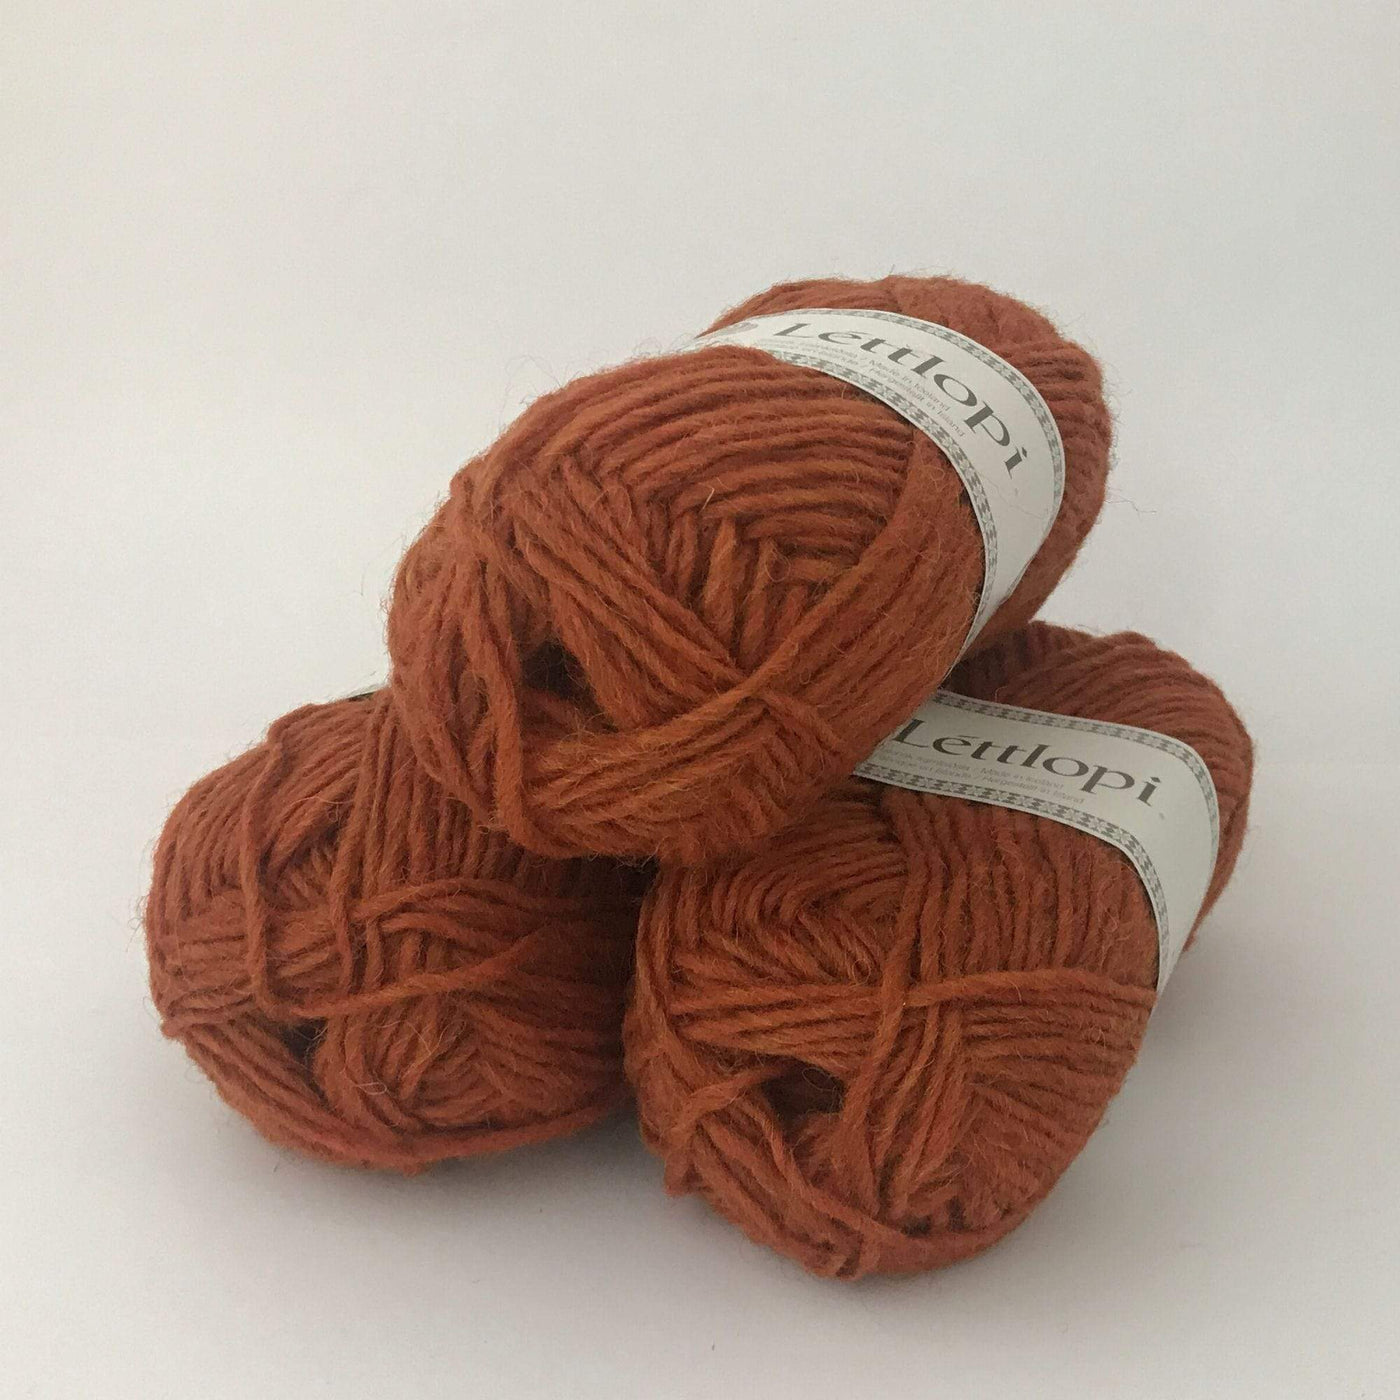 Ball of Lettlopi in colorway 1704 - apricot.